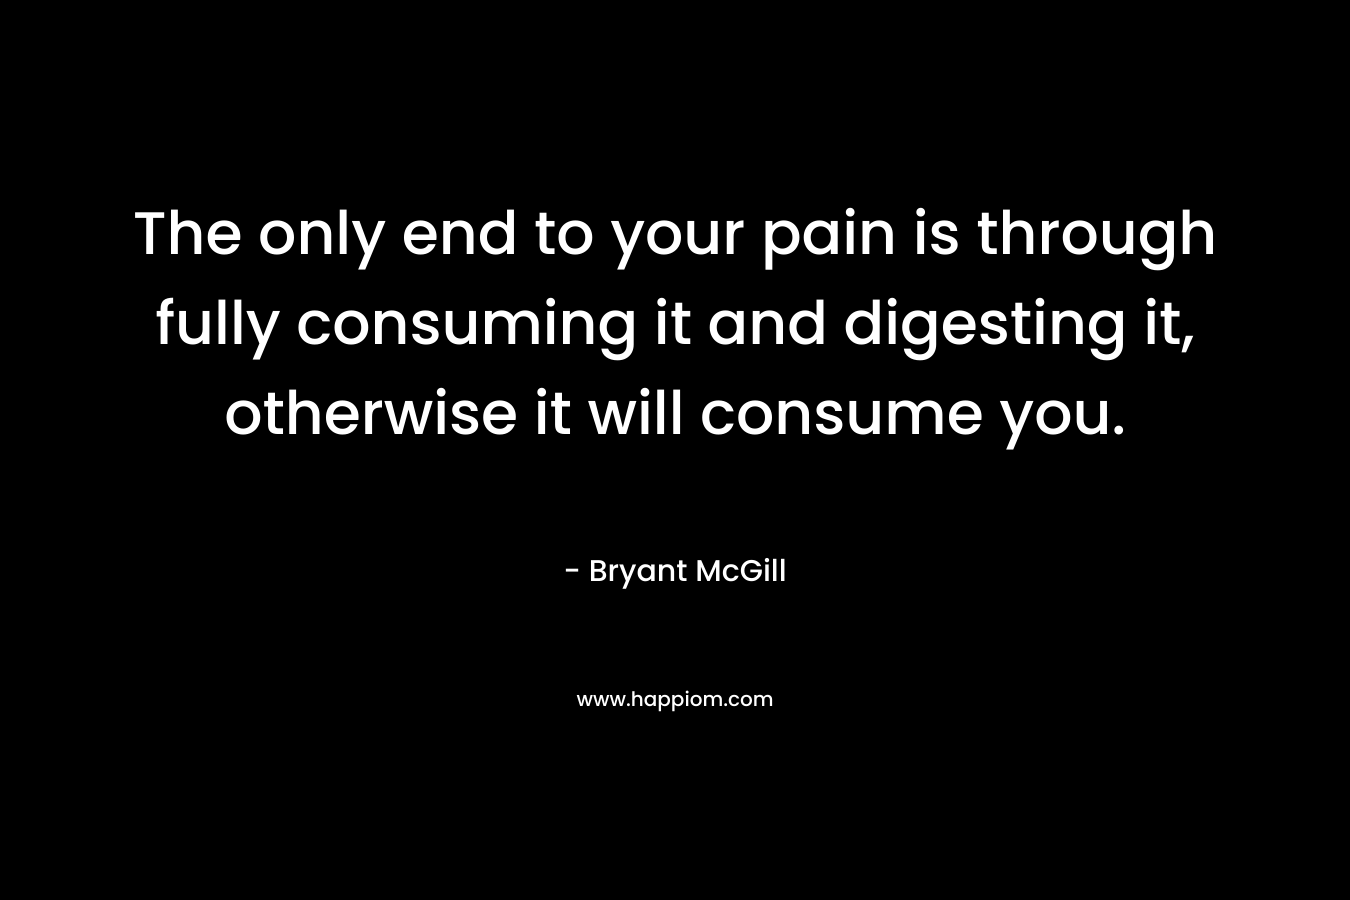 The only end to your pain is through fully consuming it and digesting it, otherwise it will consume you. – Bryant McGill